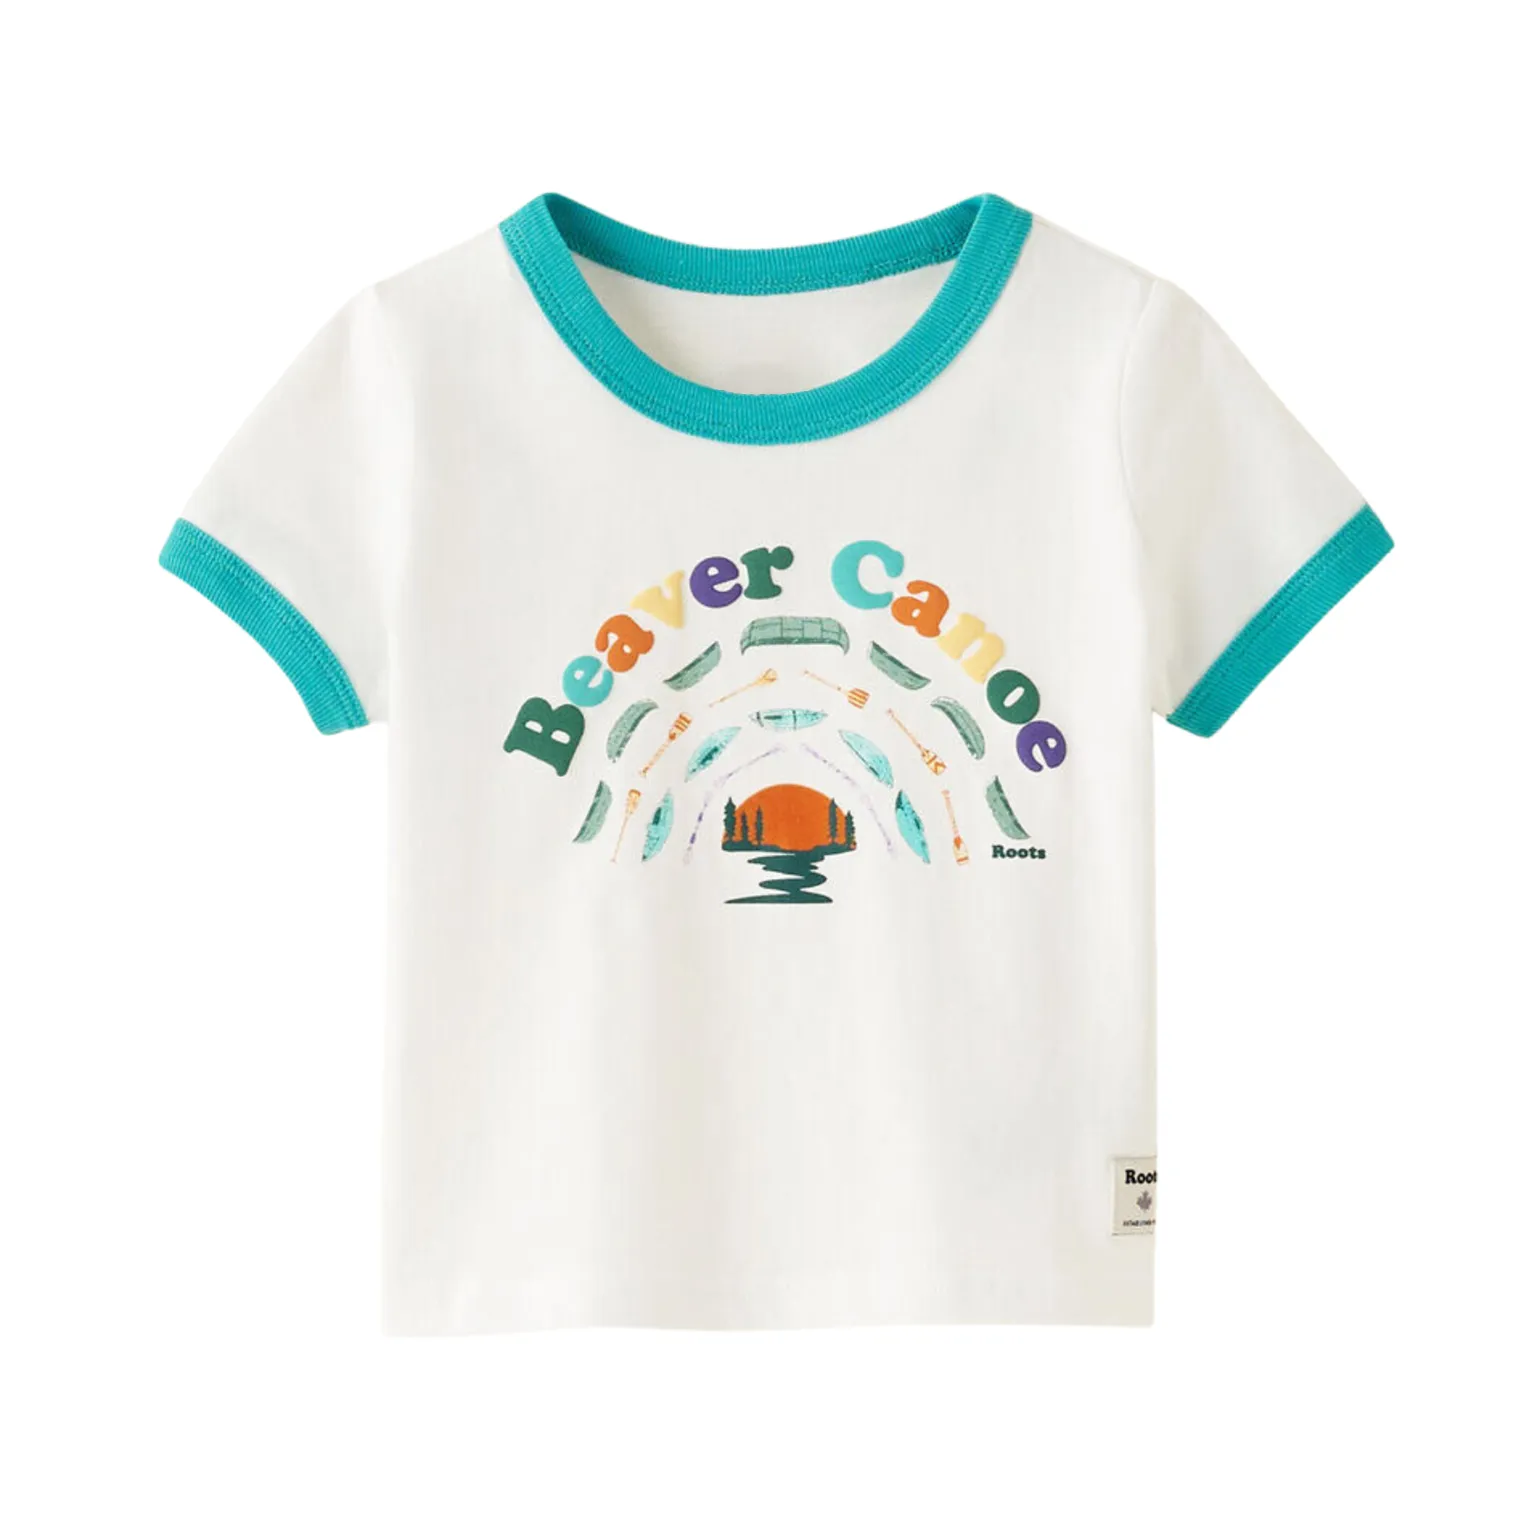 Eco-friendly ODM manufacturing service for Toddler T-Shirt.